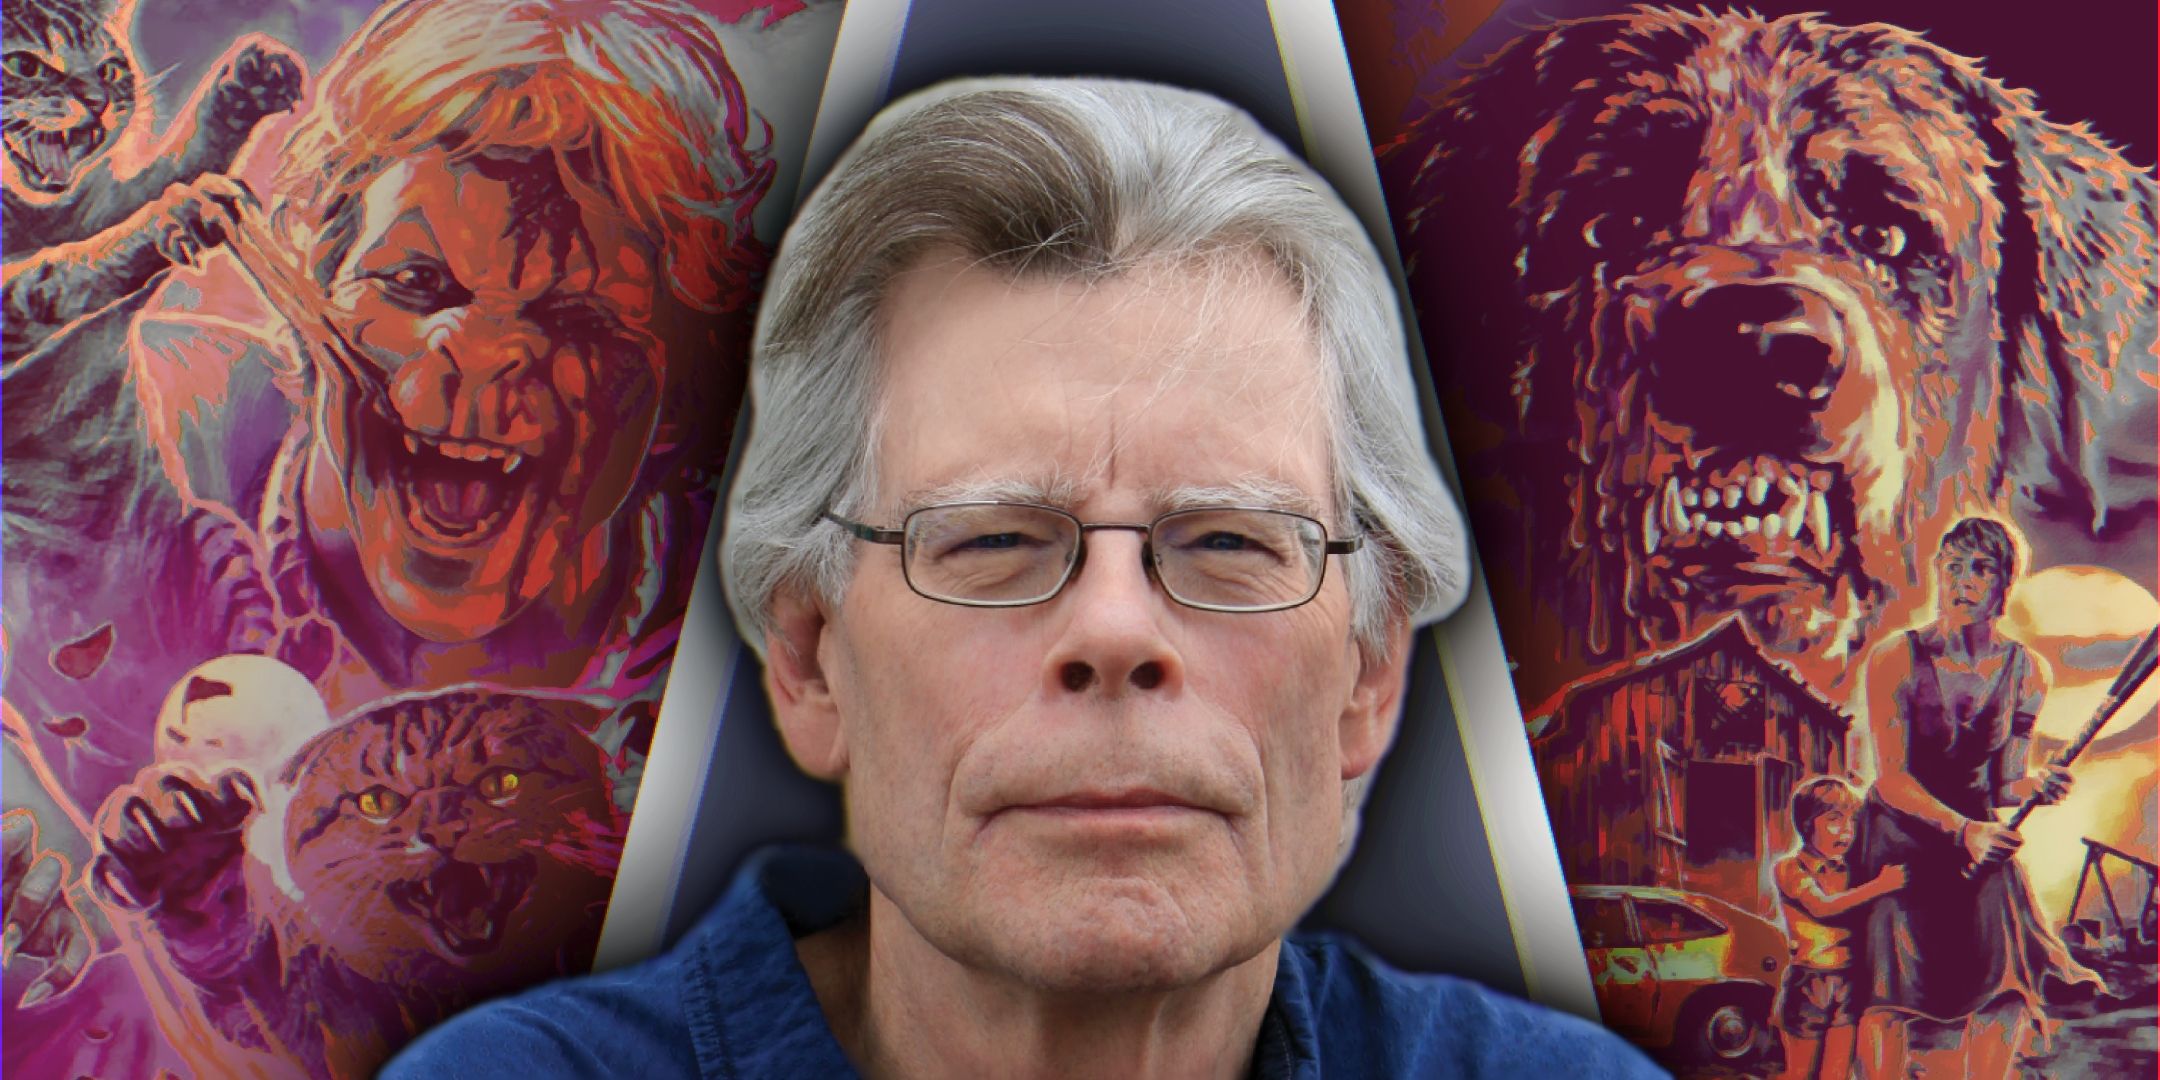 A close-up of Stephen King alongside cartoon-ish posters for Sleepwalkers and Cujo.